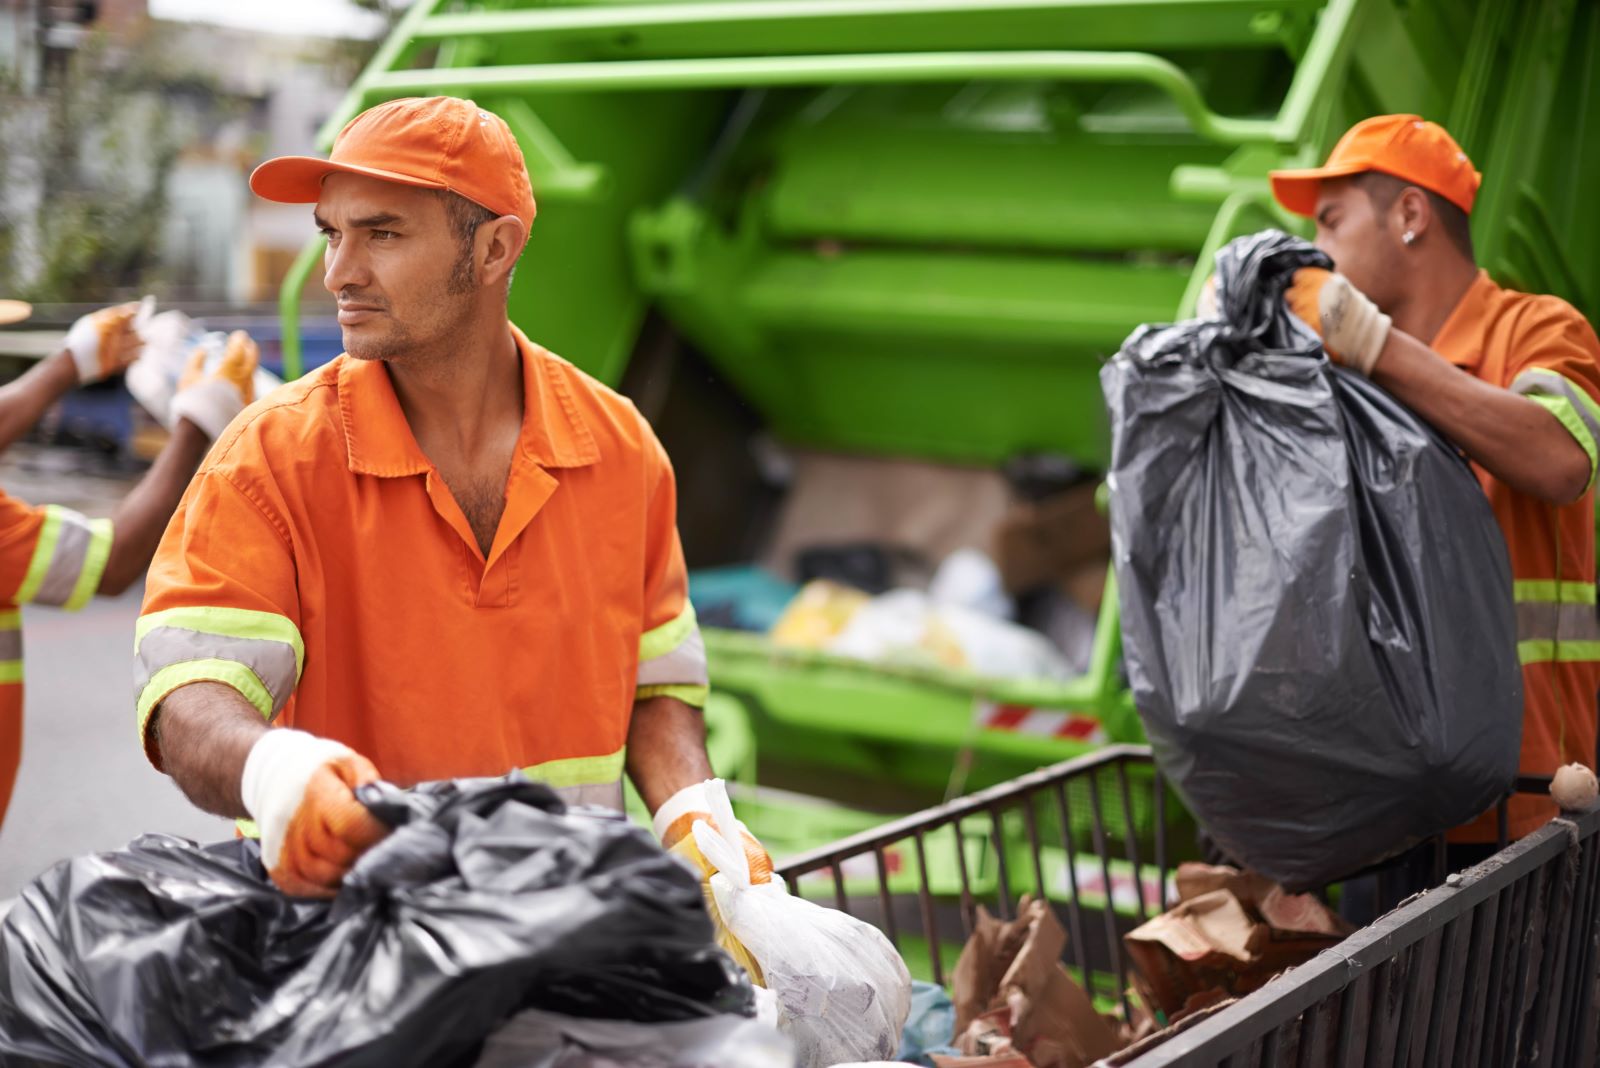 waste disposal companies in south africa